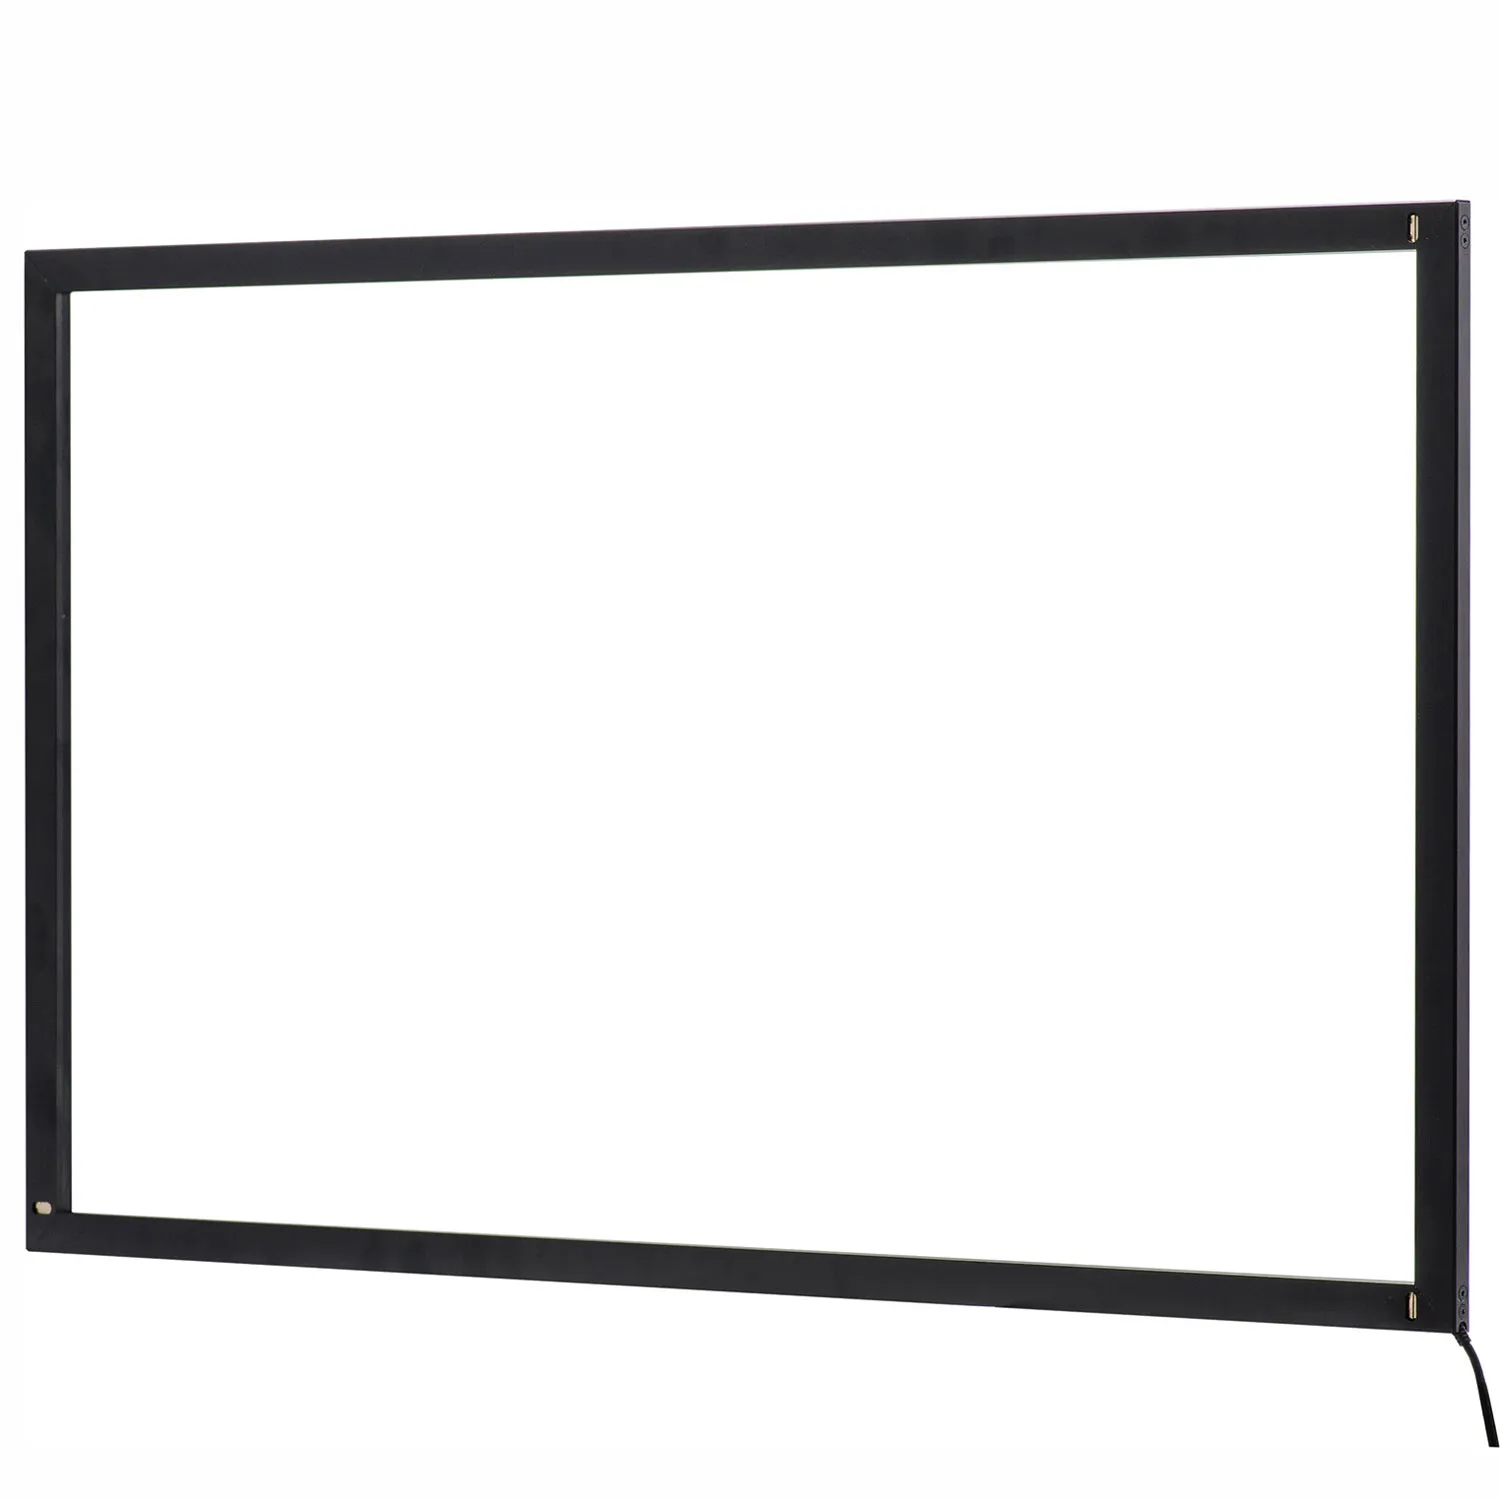 Touch frame Keetouch GmbH 65" KP-650-IW2S0U1